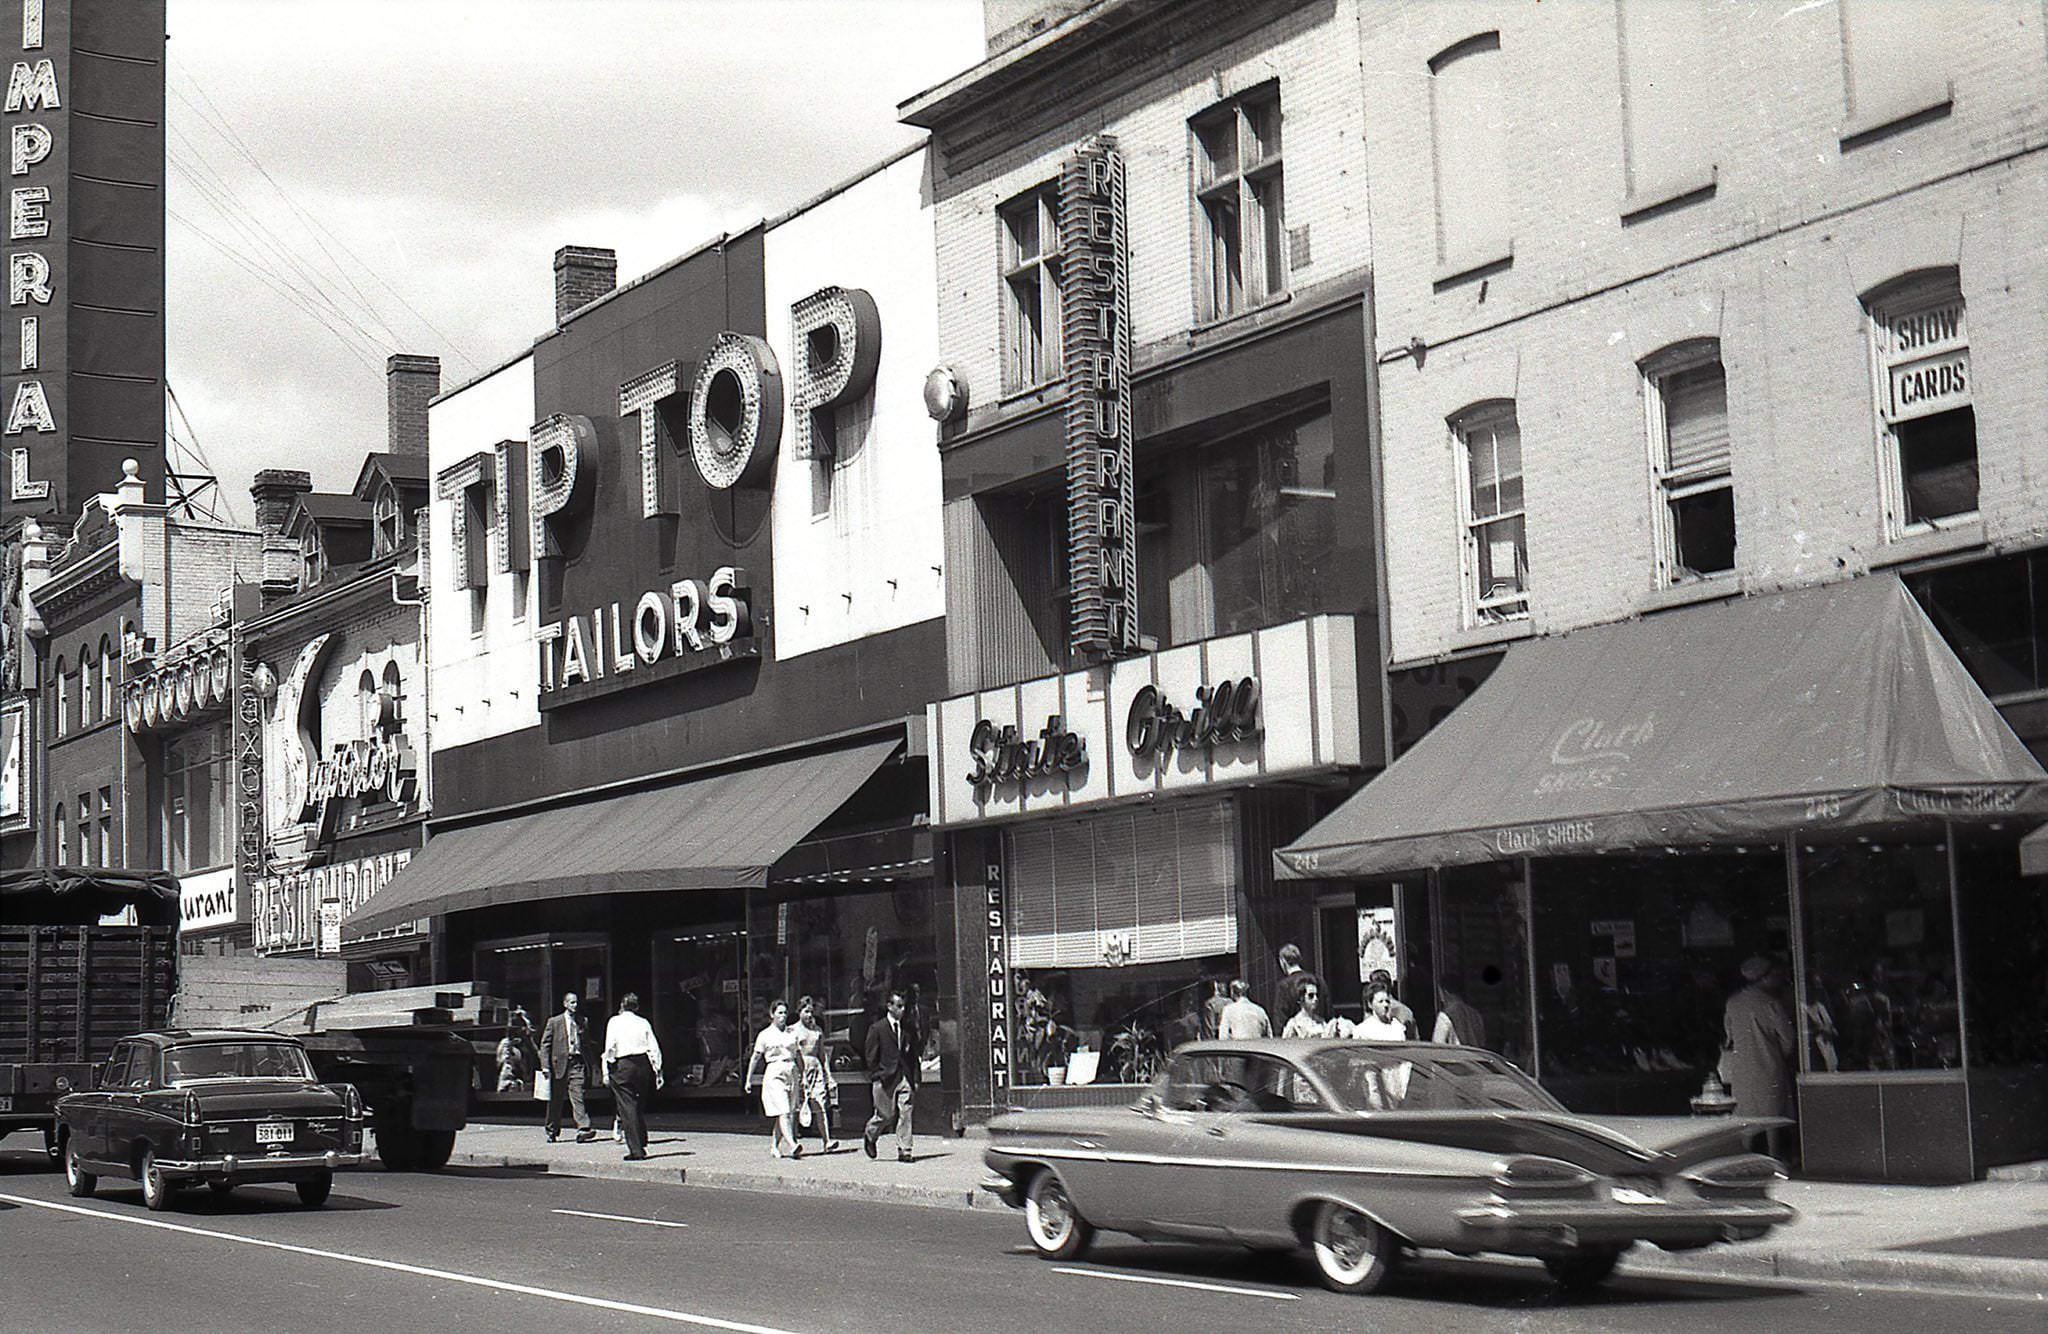 243-255 Yonge Street in 1962 Clark Shoes State Grill Tip Top Tailors Superior Tea Rooms Imperial Theatre sign visible a few shops to the north